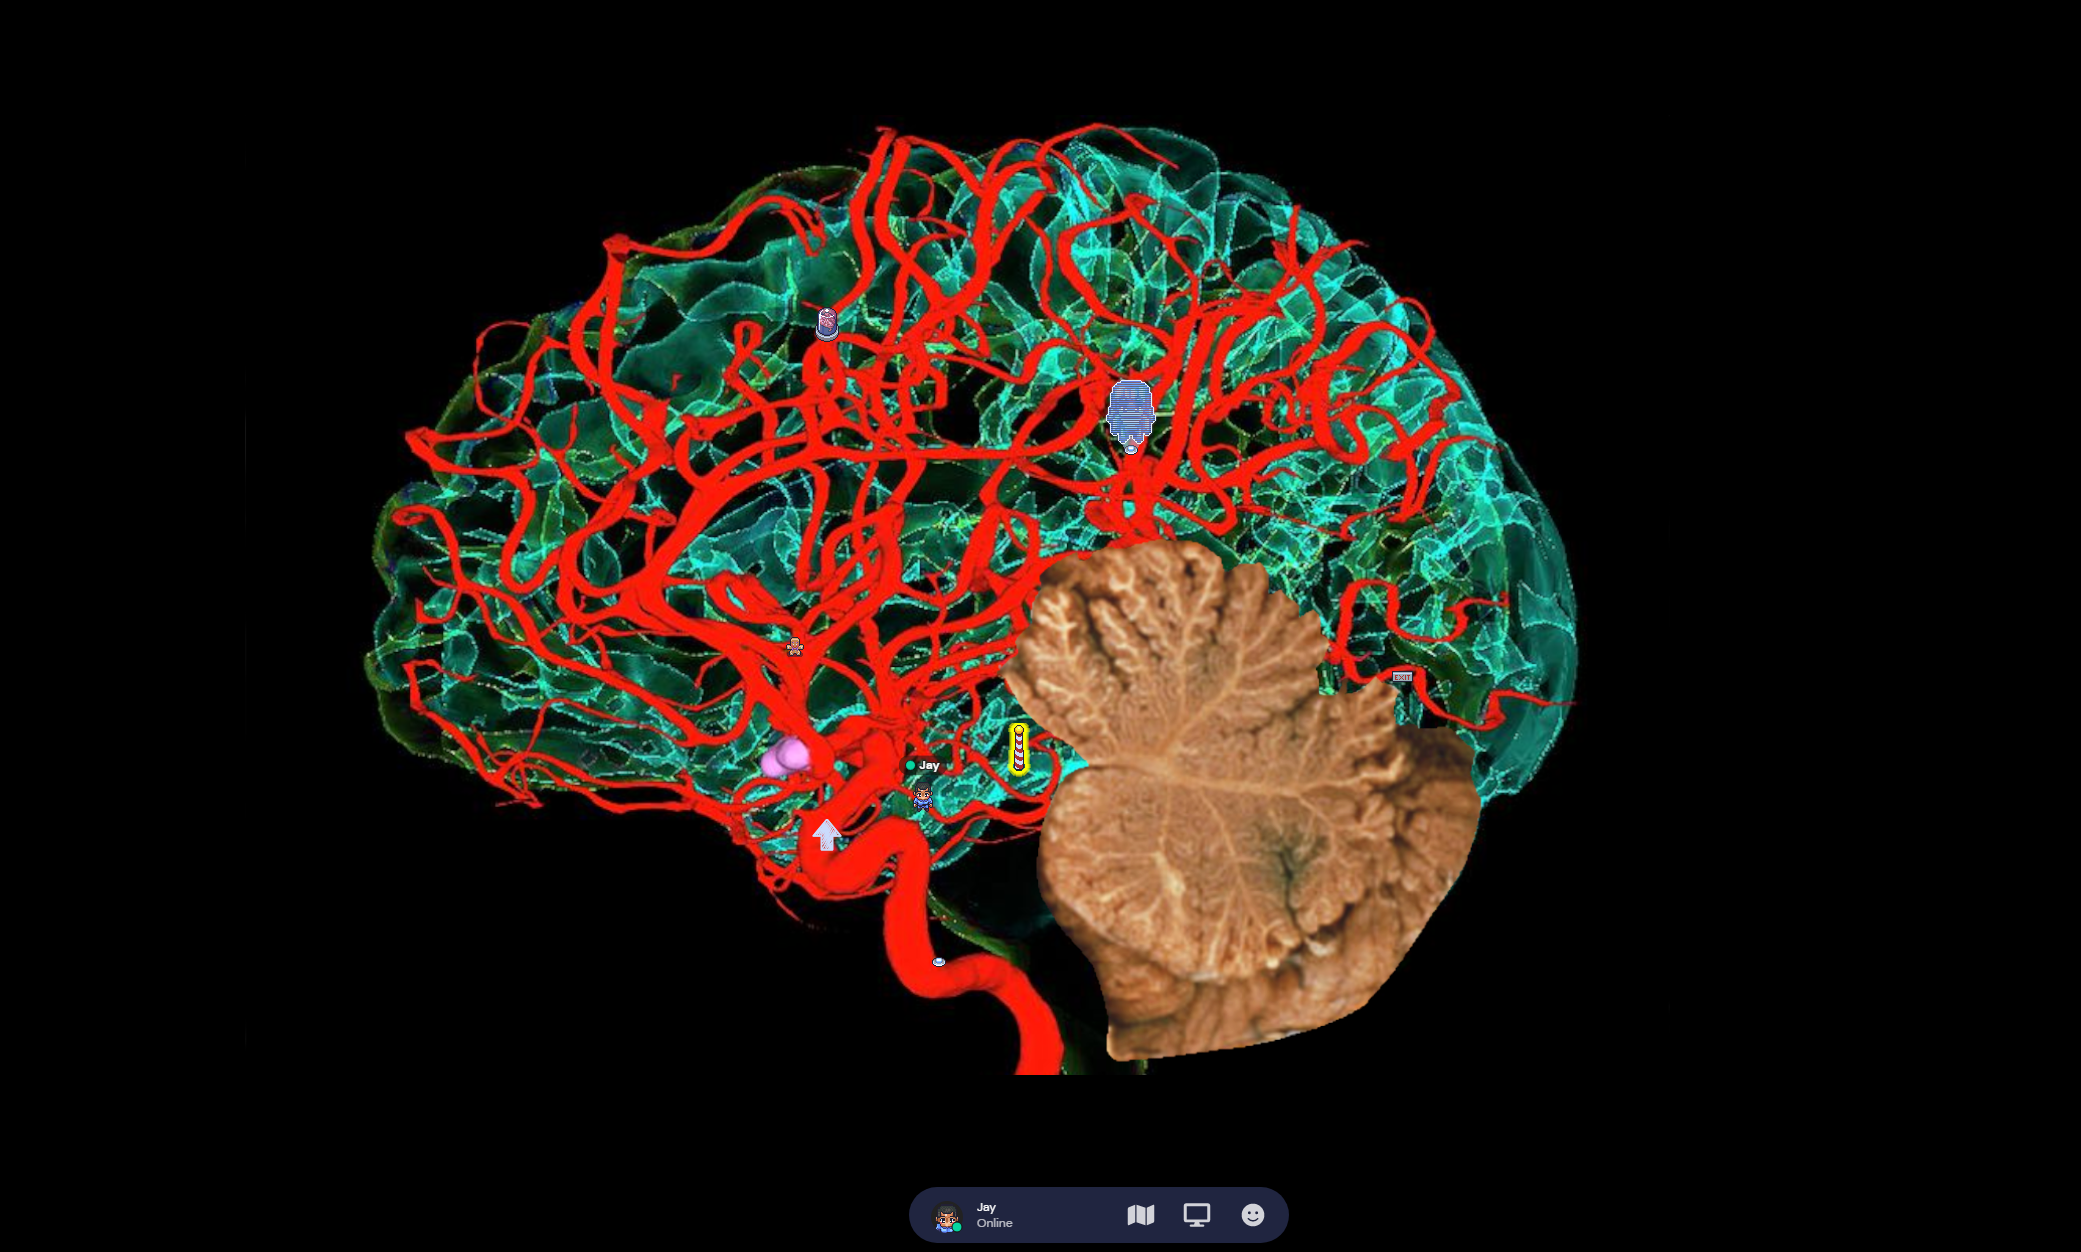 Figure 2: The brain map on Gathertown, which features the different components of the brain